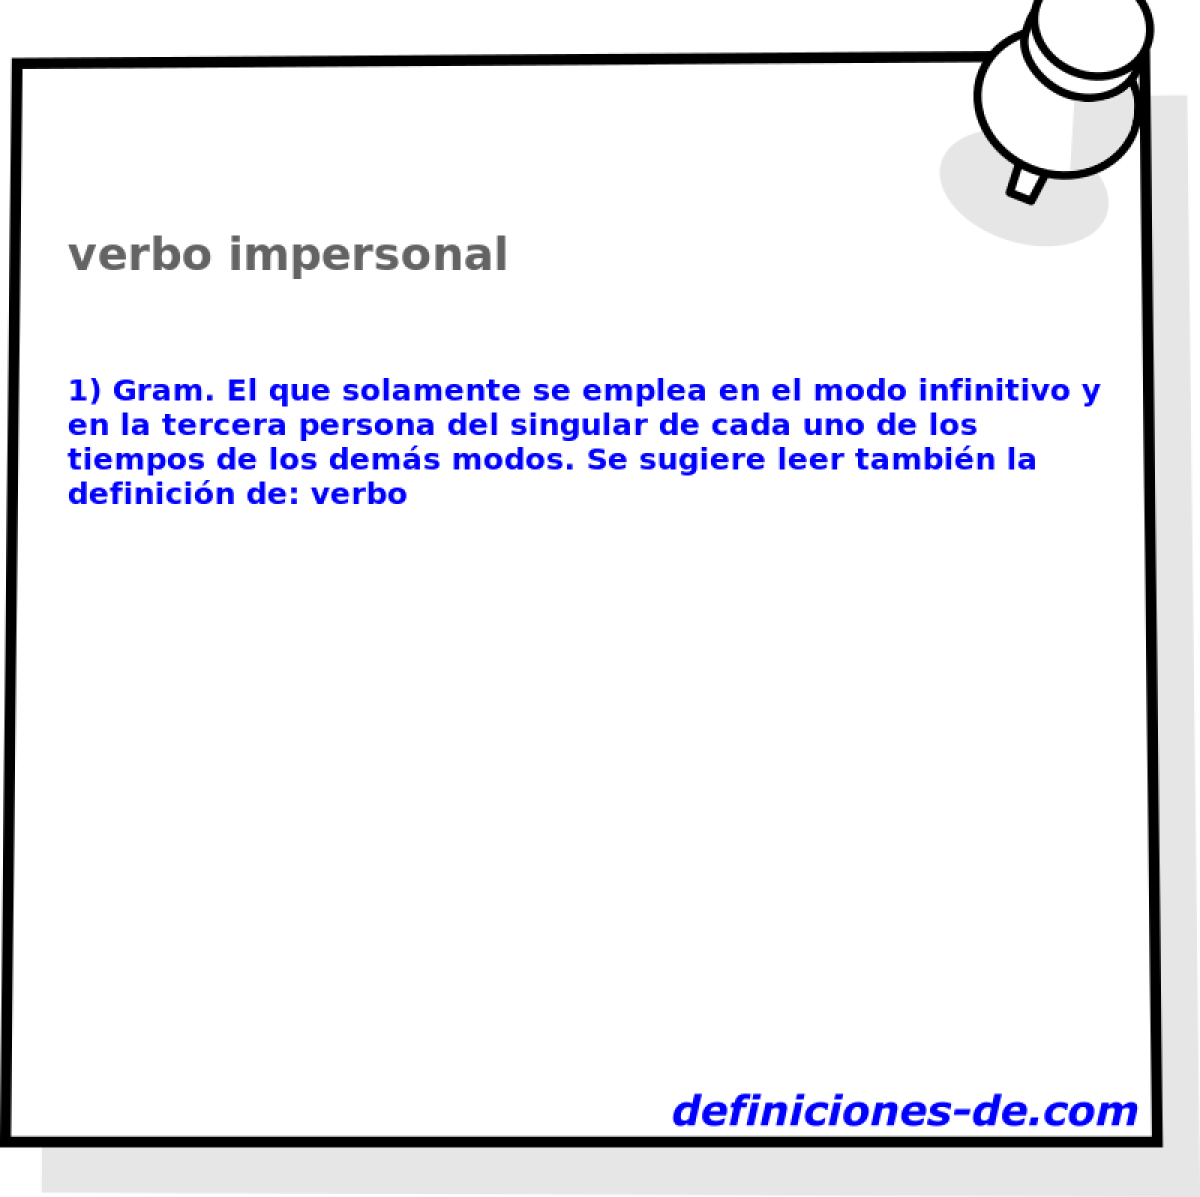 verbo impersonal 